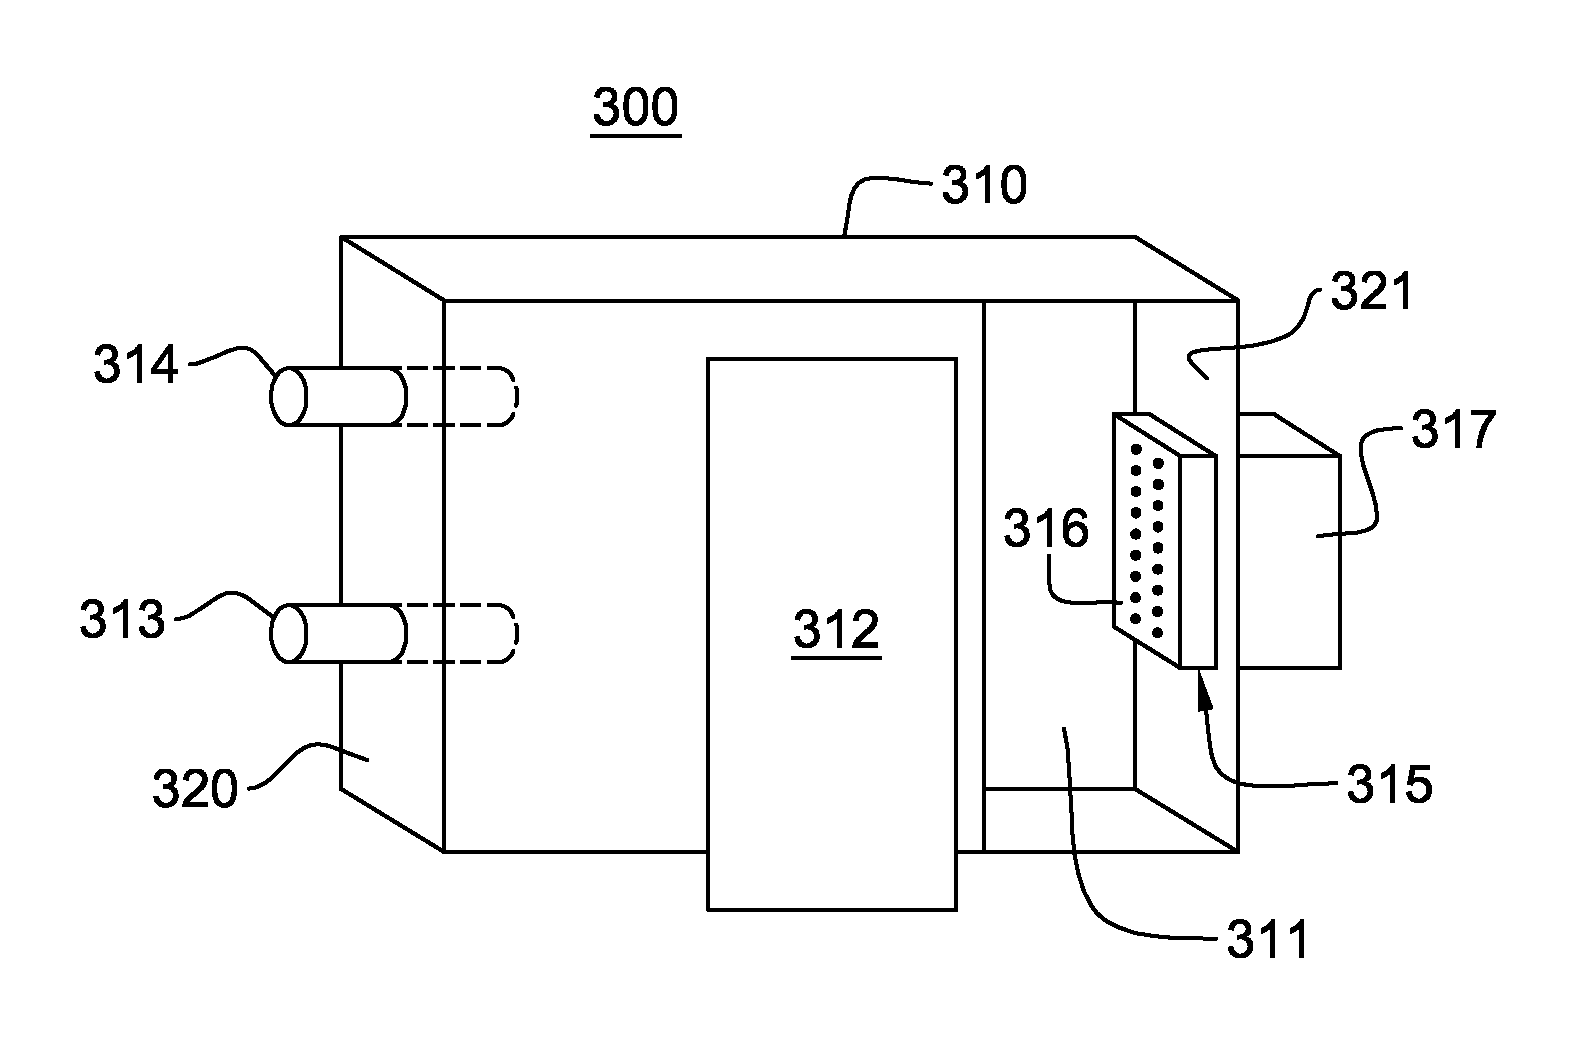 Apparatus and method for facilitating immersion-cooling of an electronic subsystem